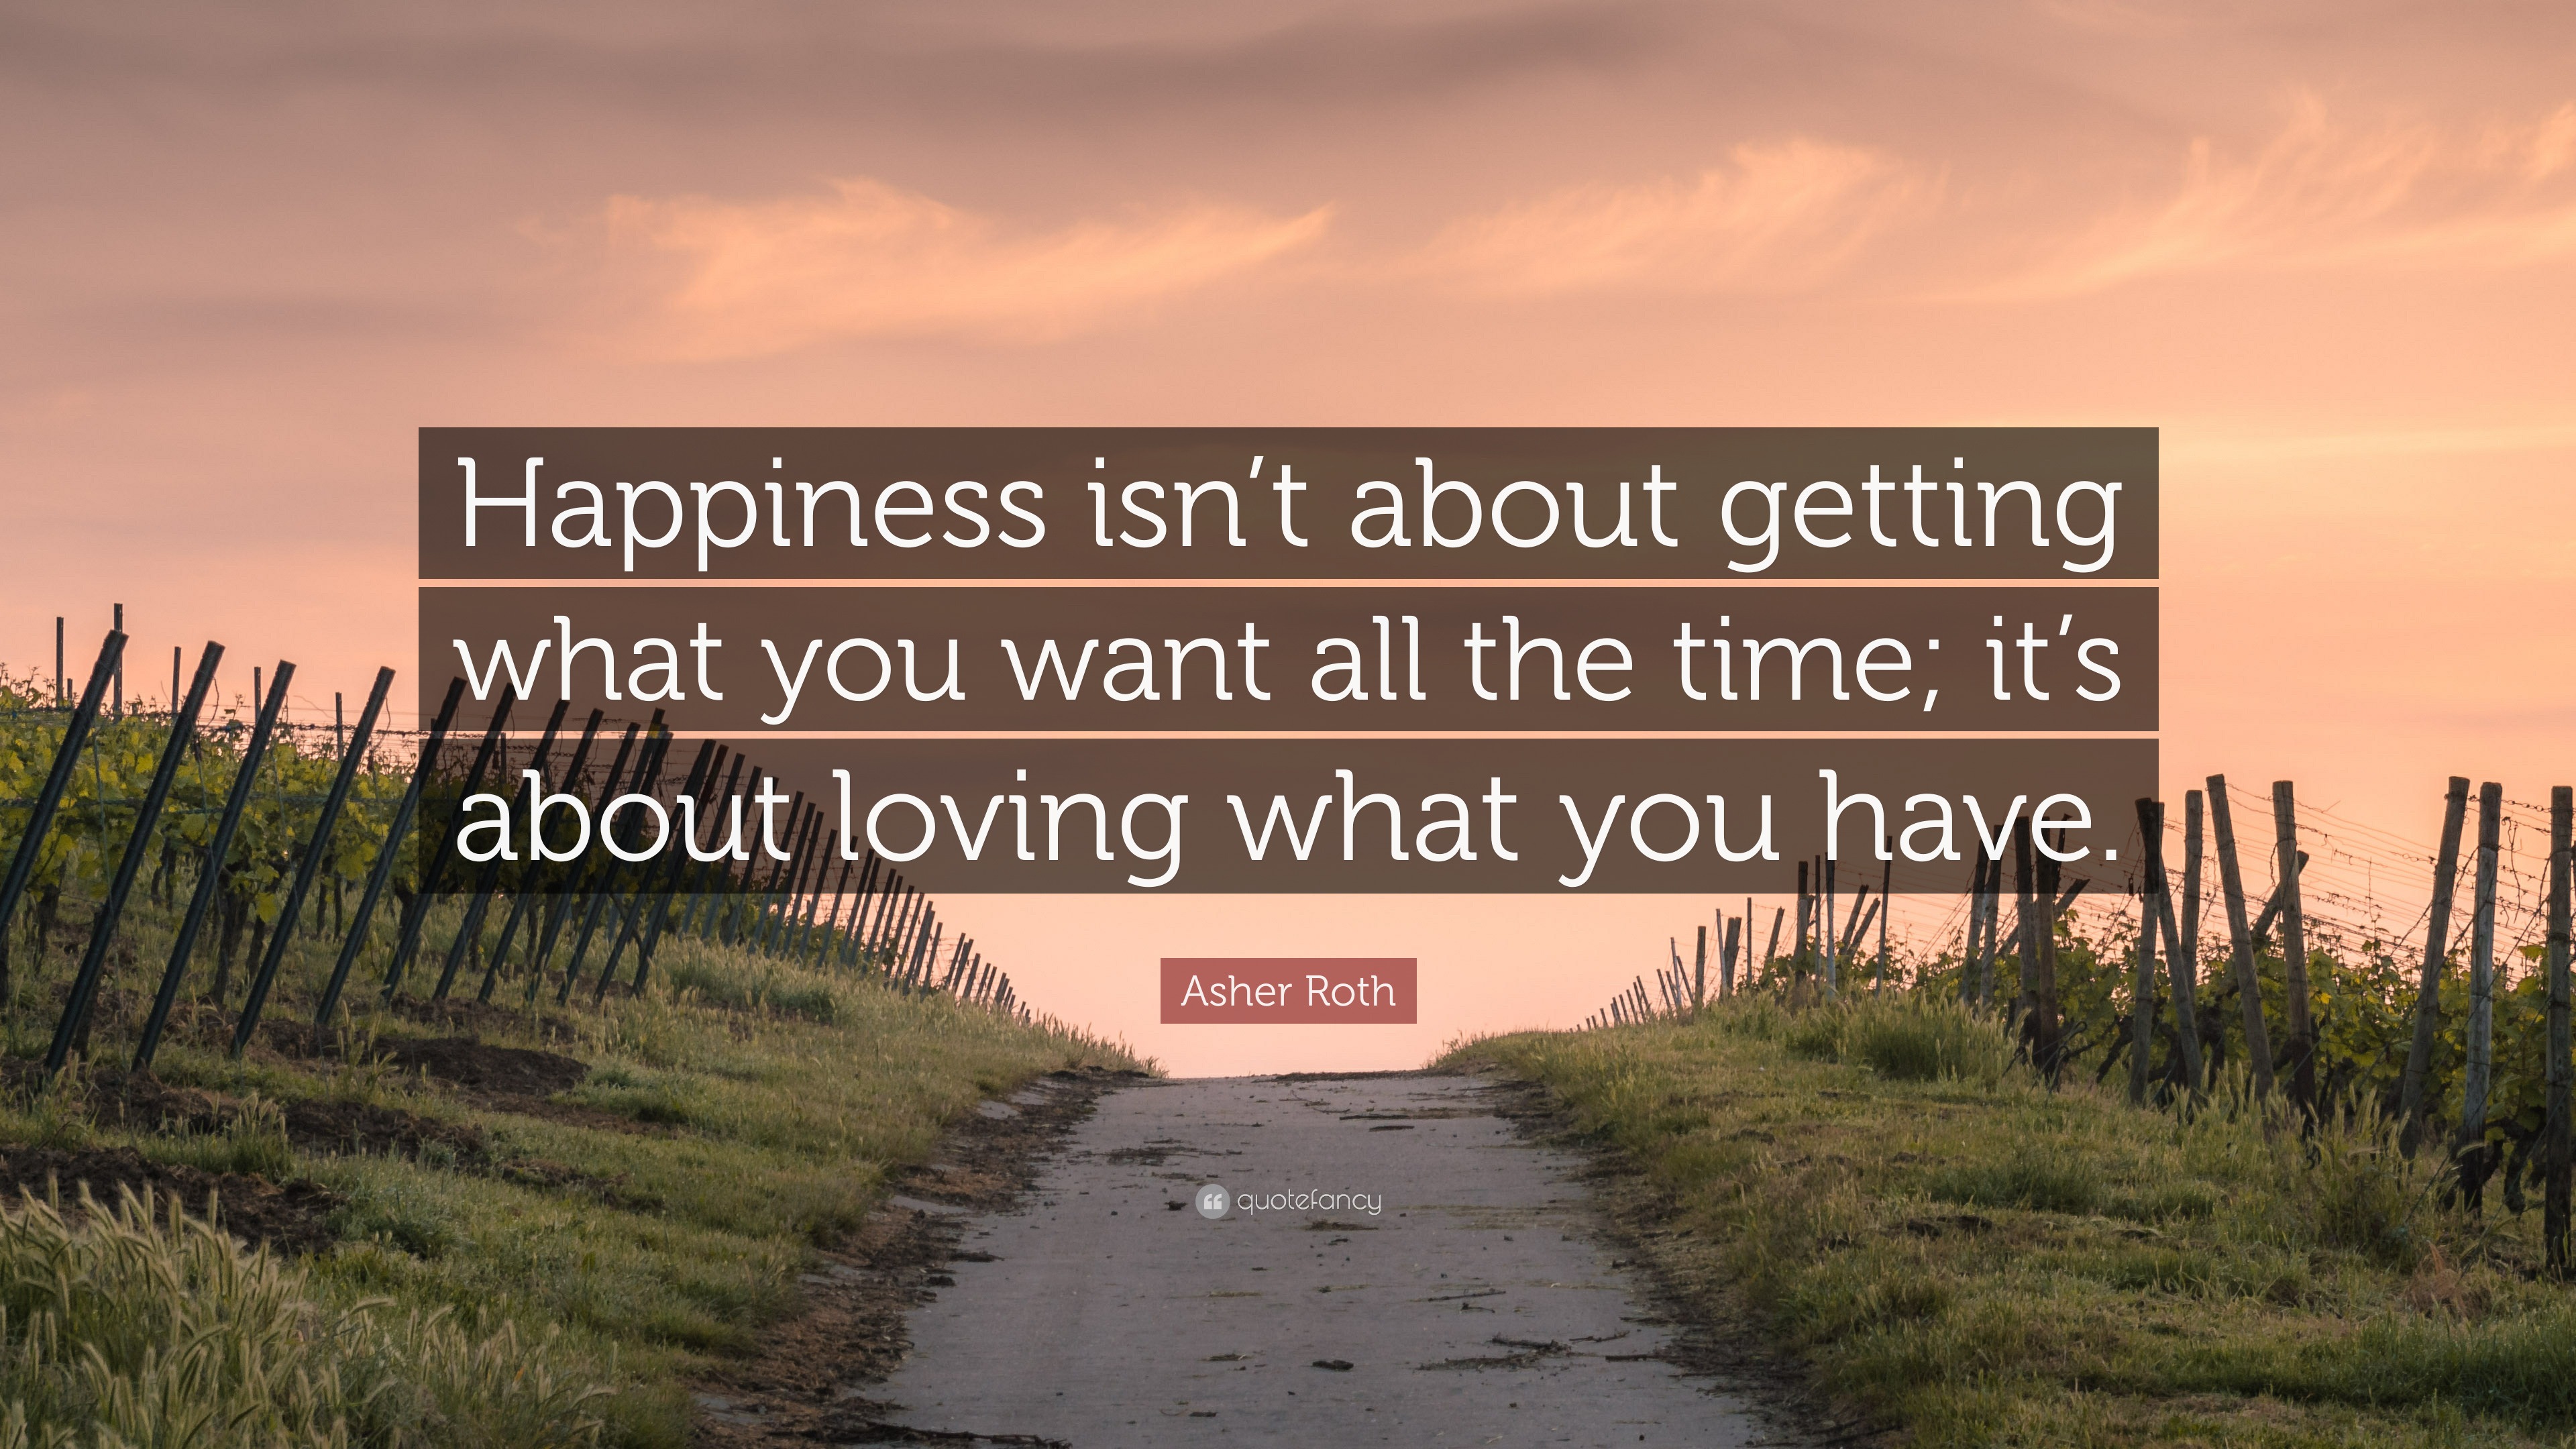 Asher Roth Quote: “Happiness isn’t about getting what you want all the ...